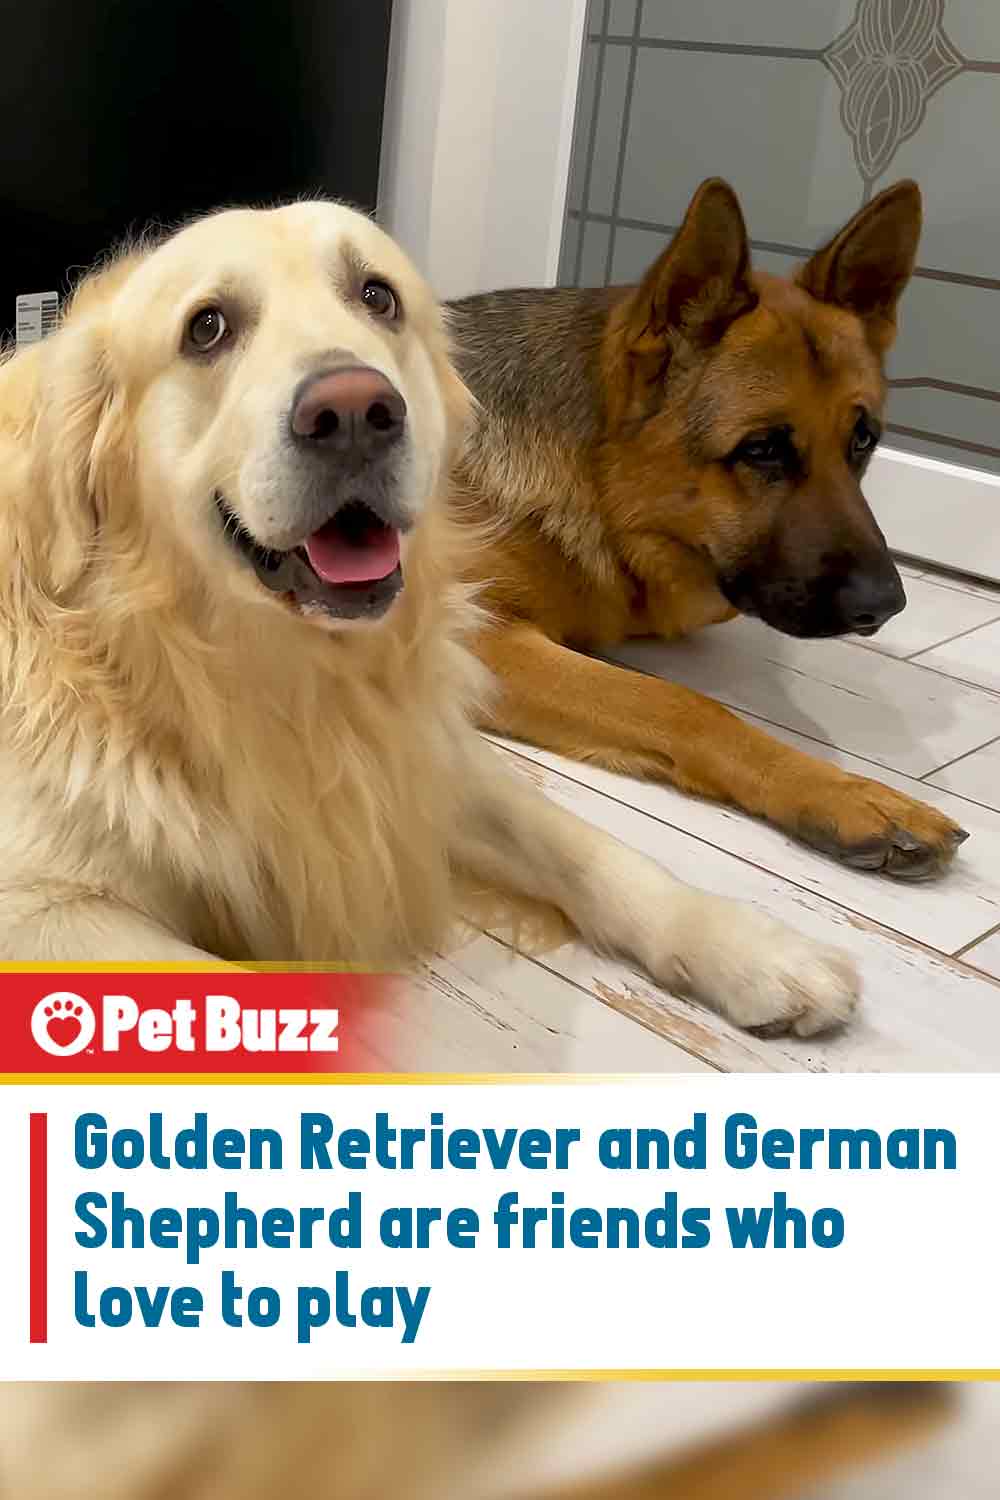 Golden Retriever and German Shepherd are friends who love to play